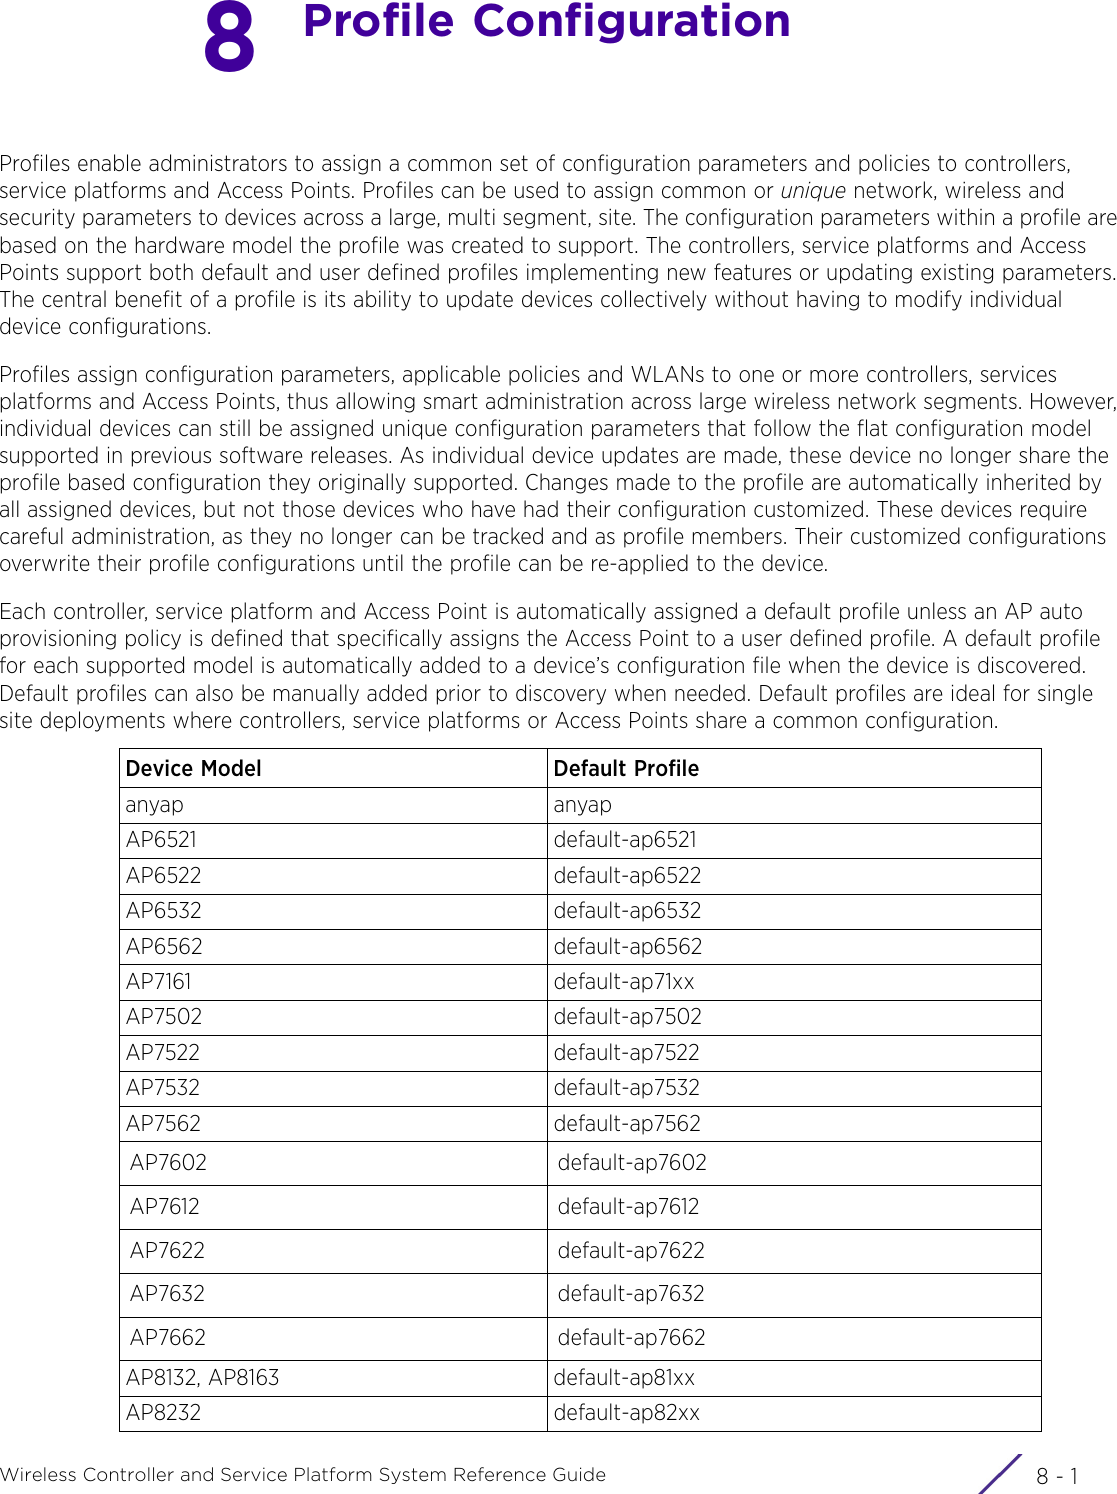 8 - 1Wireless Controller and Service Platform System Reference Guide8Profile ConfigurationProfiles enable administrators to assign a common set of configuration parameters and policies to controllers, service platforms and Access Points. Profiles can be used to assign common or unique network, wireless and security parameters to devices across a large, multi segment, site. The configuration parameters within a profile are based on the hardware model the profile was created to support. The controllers, service platforms and Access Points support both default and user defined profiles implementing new features or updating existing parameters. The central benefit of a profile is its ability to update devices collectively without having to modify individual device configurations.Profiles assign configuration parameters, applicable policies and WLANs to one or more controllers, services platforms and Access Points, thus allowing smart administration across large wireless network segments. However, individual devices can still be assigned unique configuration parameters that follow the flat configuration model supported in previous software releases. As individual device updates are made, these device no longer share the profile based configuration they originally supported. Changes made to the profile are automatically inherited by all assigned devices, but not those devices who have had their configuration customized. These devices require careful administration, as they no longer can be tracked and as profile members. Their customized configurations overwrite their profile configurations until the profile can be re-applied to the device. Each controller, service platform and Access Point is automatically assigned a default profile unless an AP auto provisioning policy is defined that specifically assigns the Access Point to a user defined profile. A default profile for each supported model is automatically added to a device’s configuration file when the device is discovered. Default profiles can also be manually added prior to discovery when needed. Default profiles are ideal for single site deployments where controllers, service platforms or Access Points share a common configuration. Device Model Default Profileanyap anyapAP6521 default-ap6521AP6522 default-ap6522AP6532 default-ap6532AP6562 default-ap6562AP7161 default-ap71xxAP7502 default-ap7502AP7522 default-ap7522AP7532 default-ap7532AP7562 default-ap7562AP7602 default-ap7602AP7612 default-ap7612AP7622 default-ap7622AP7632 default-ap7632AP7662 default-ap7662AP8132, AP8163 default-ap81xxAP8232 default-ap82xx